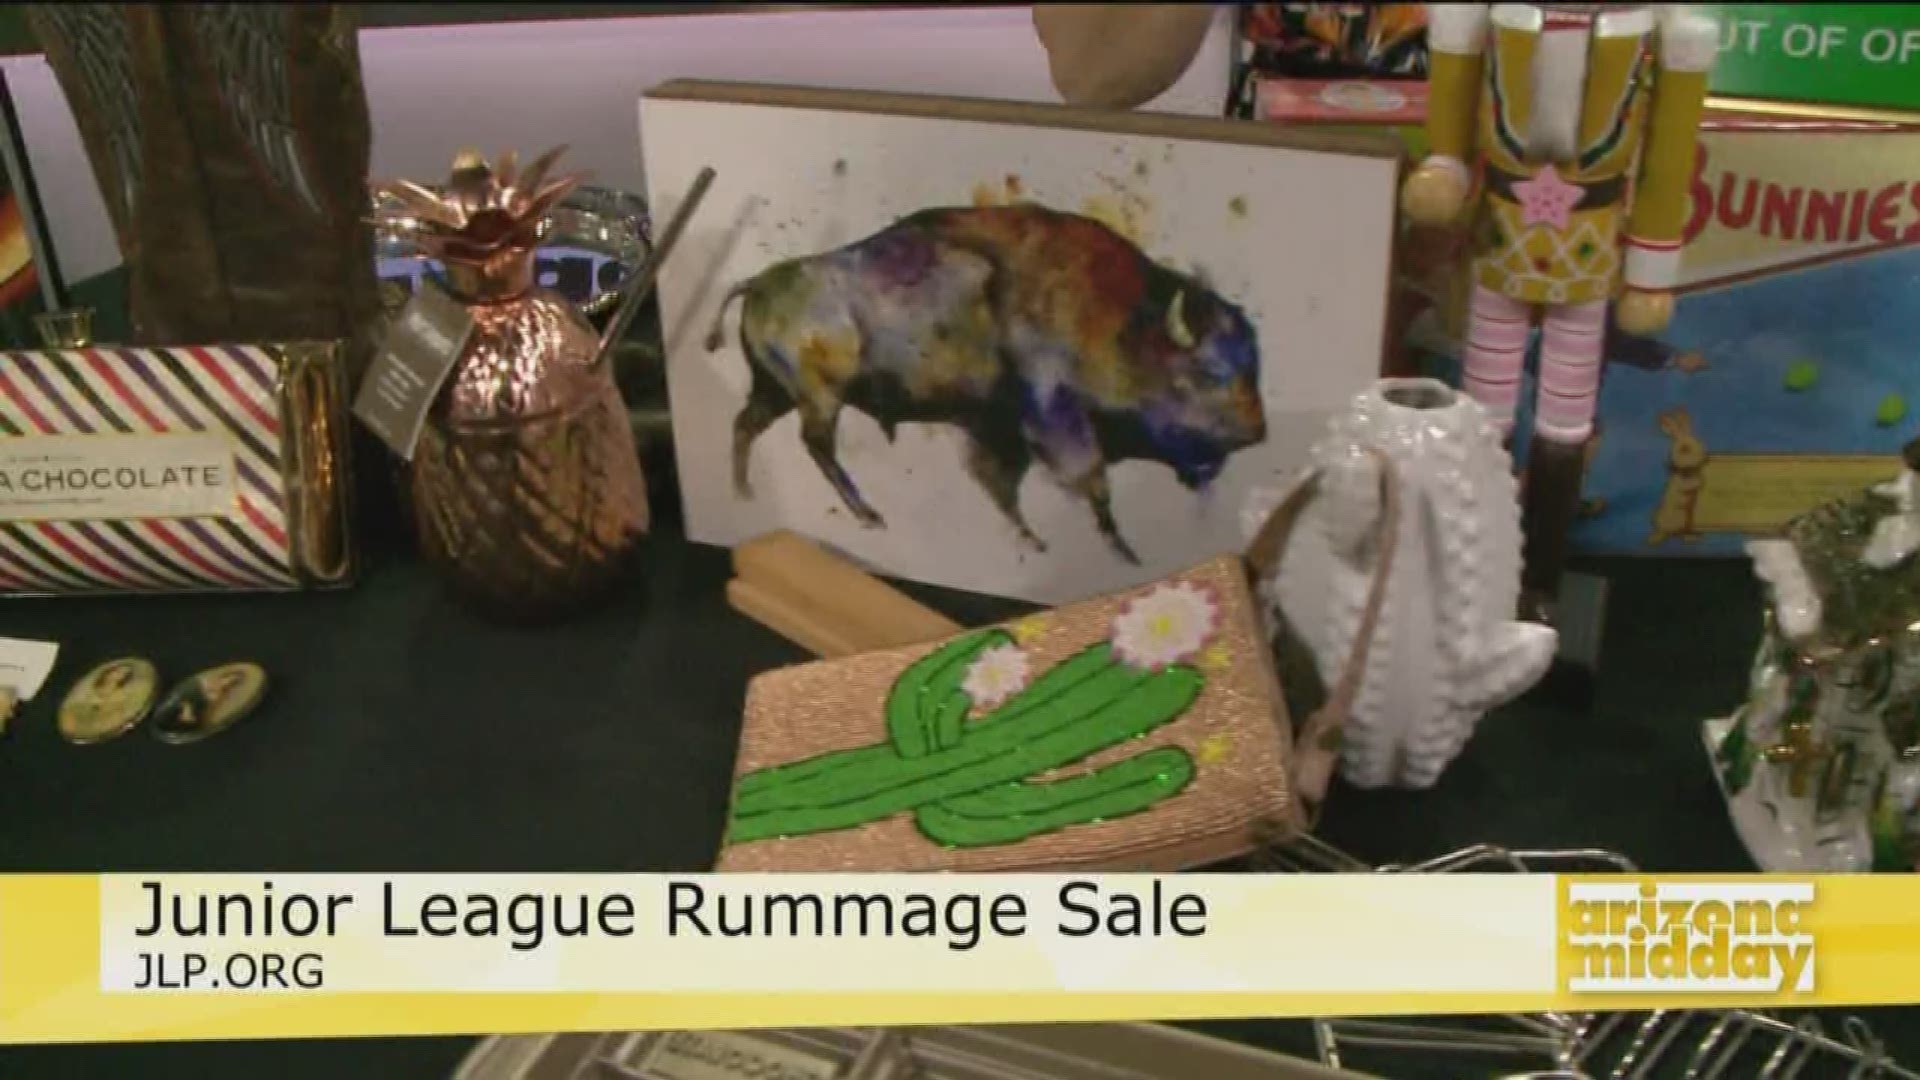 Tereza Fitz of the Junior League of Phoenix gives us all the details about the 83rd Annual Rummage Sale happening this Saturday at the Arizona State fairgrounds!